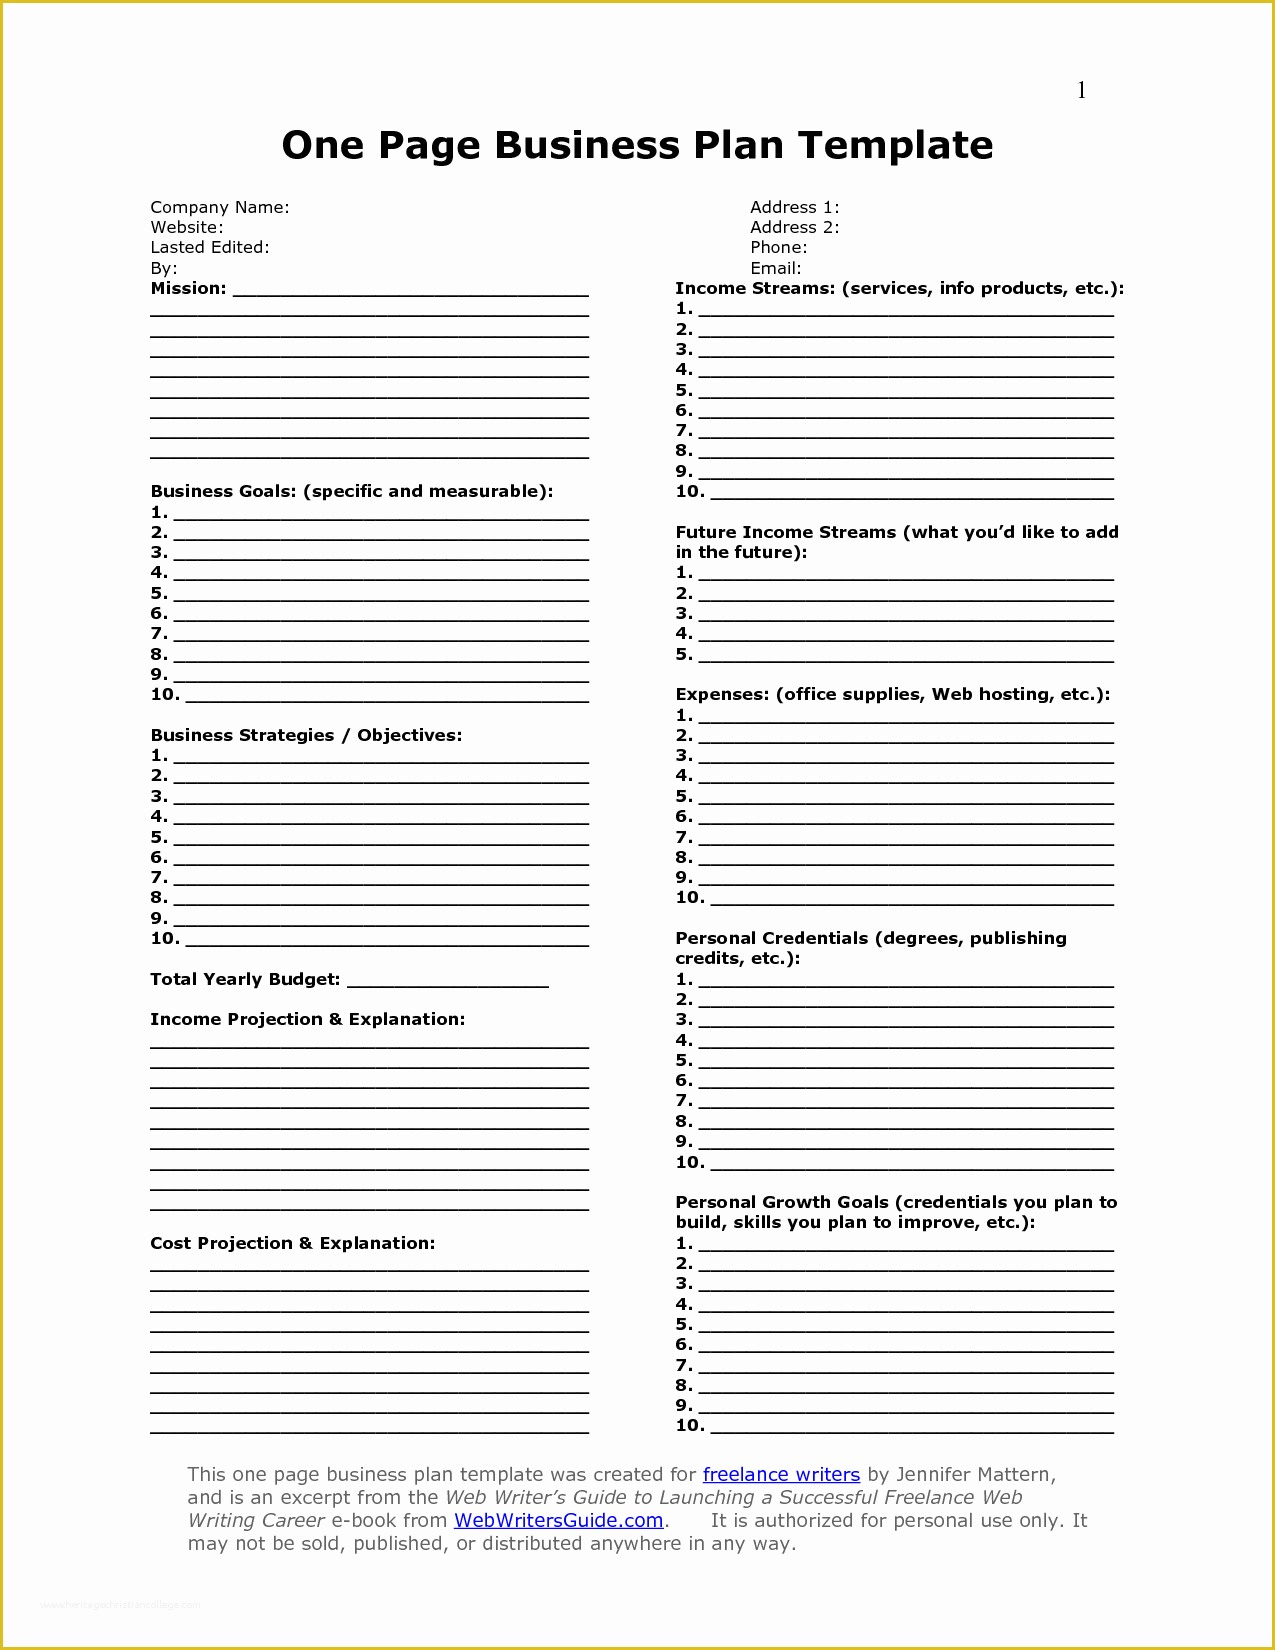 Free Online Business Proposal Template Of E Page Business Plan Template